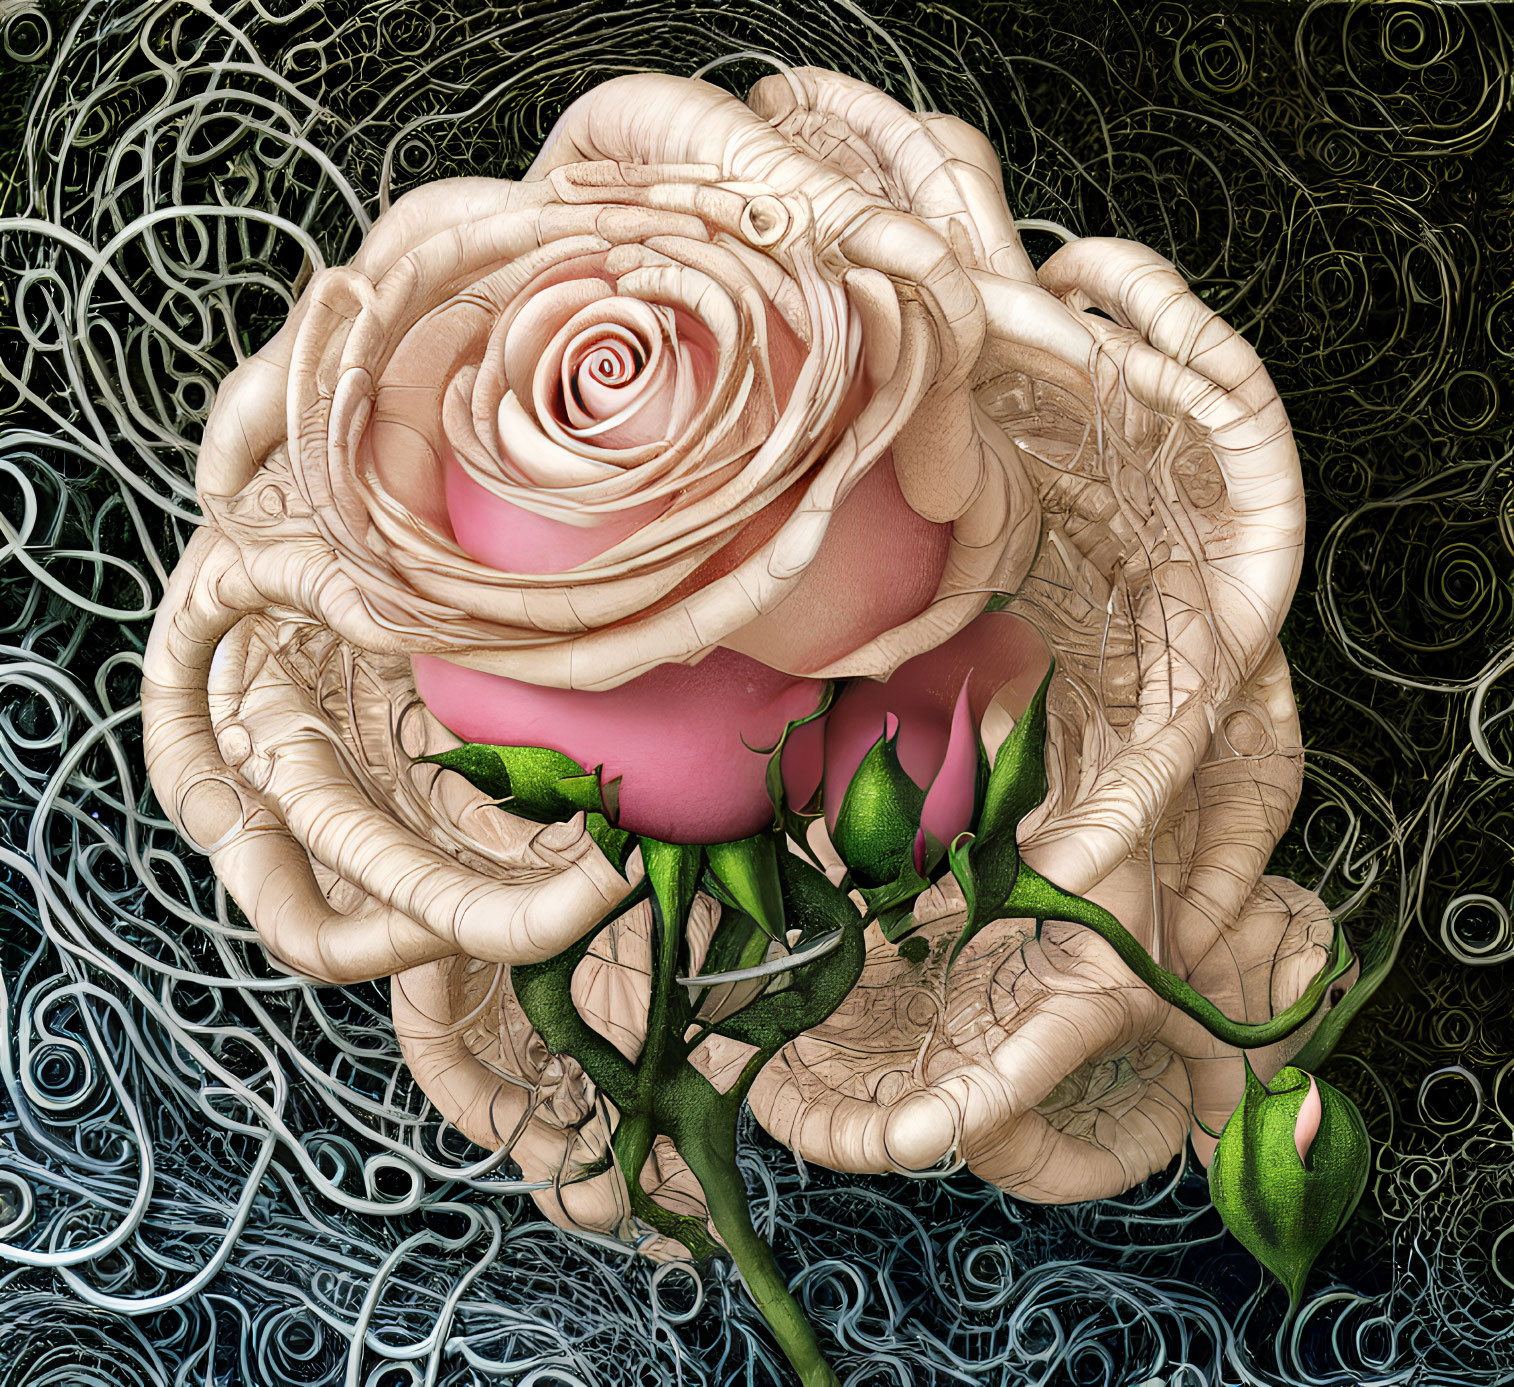 Surreal beige rose on swirling black and white background